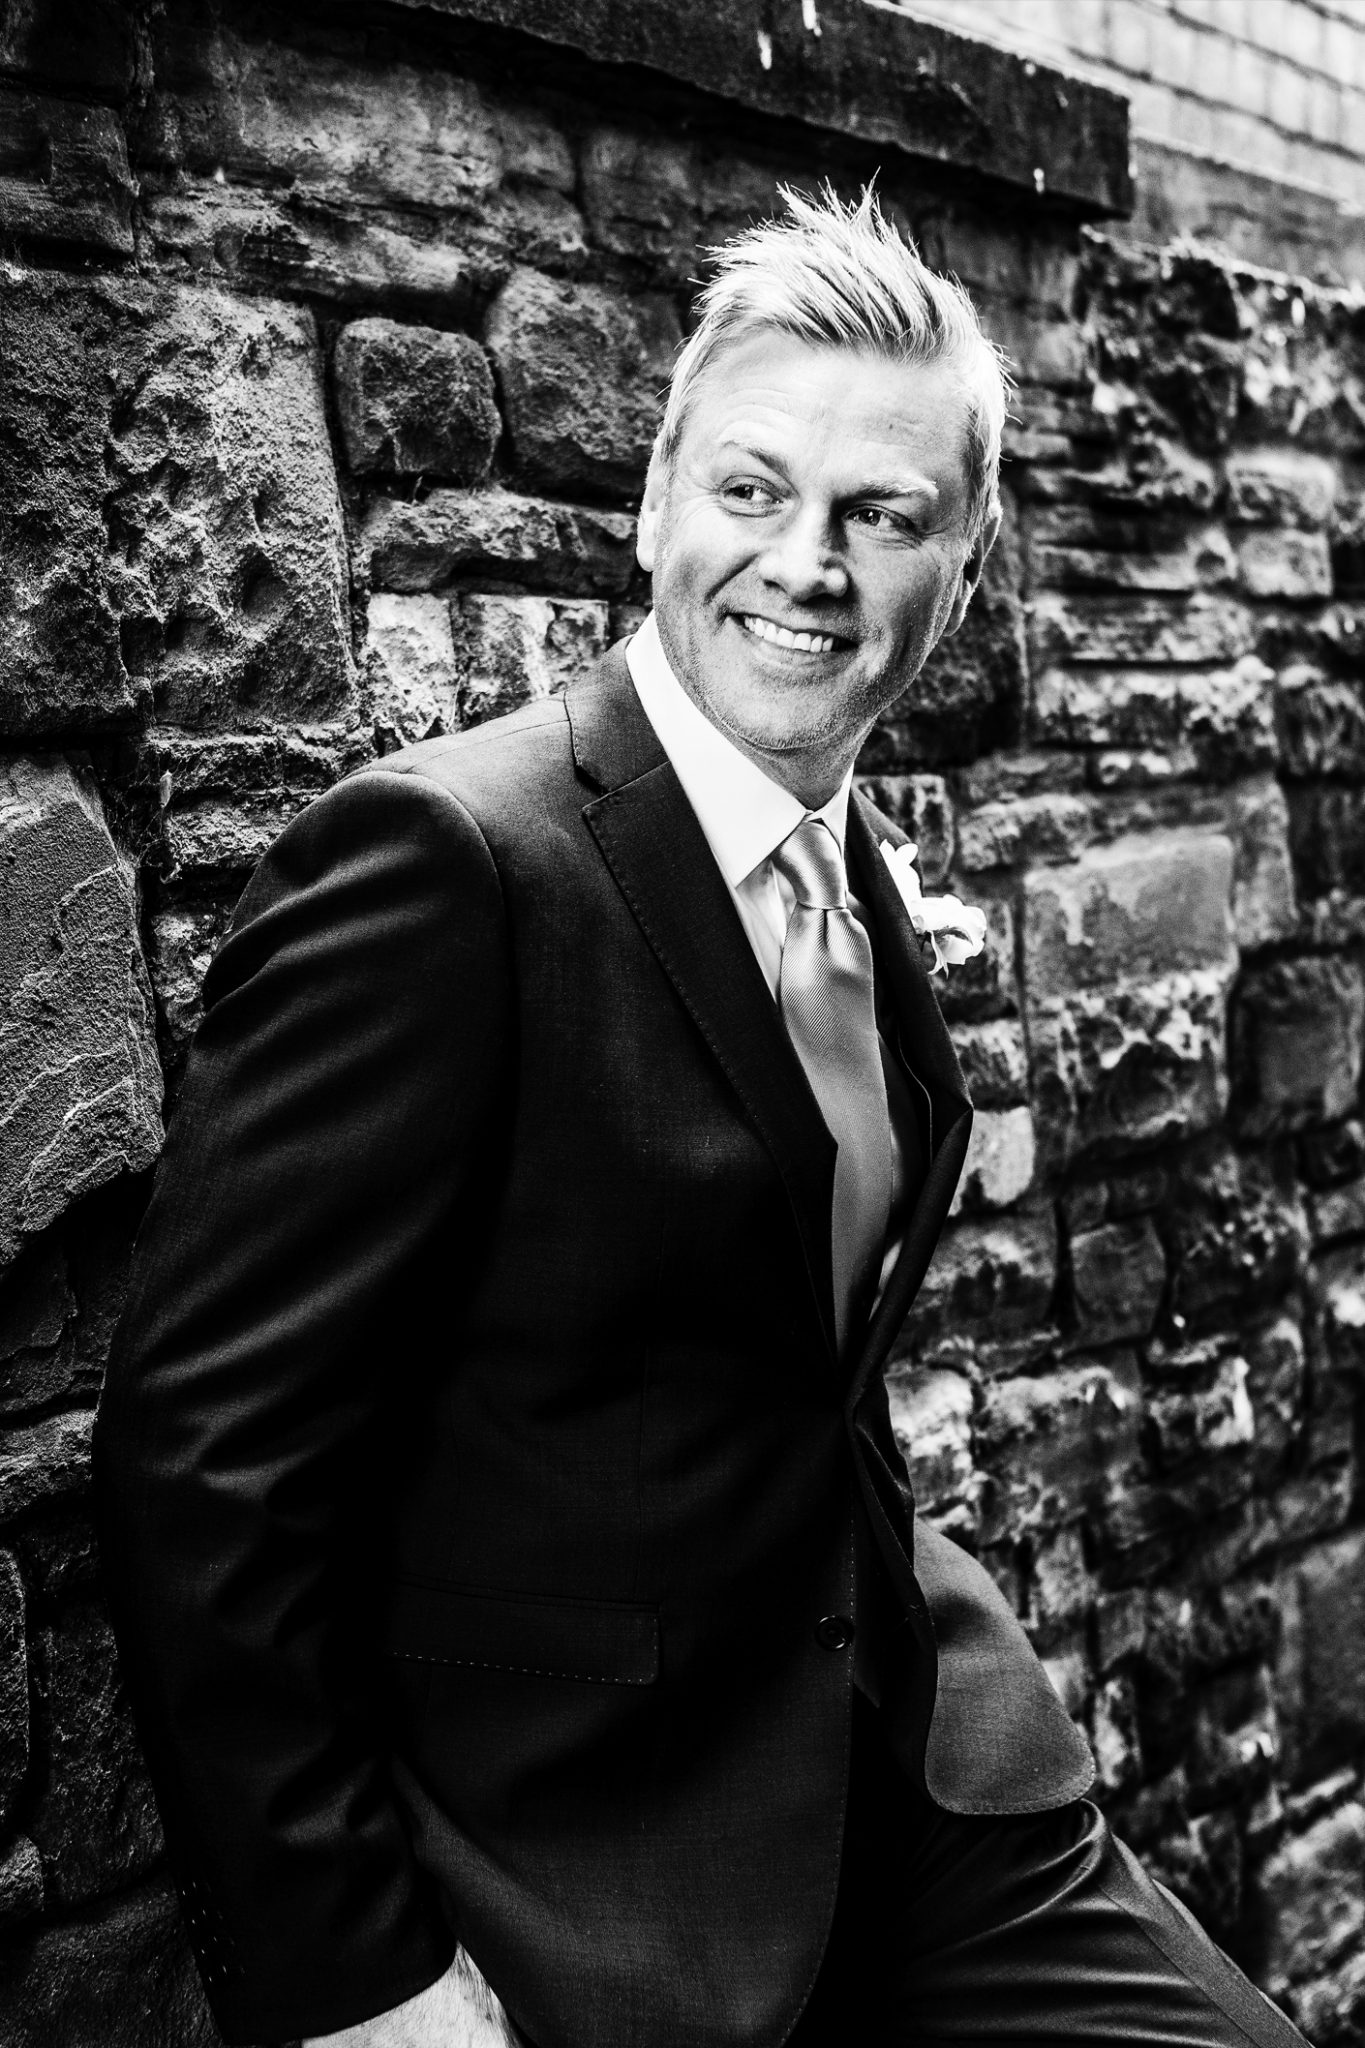 wedding-photography-of-the-groom-at-the-belle-epoque-knutsford-cheshire